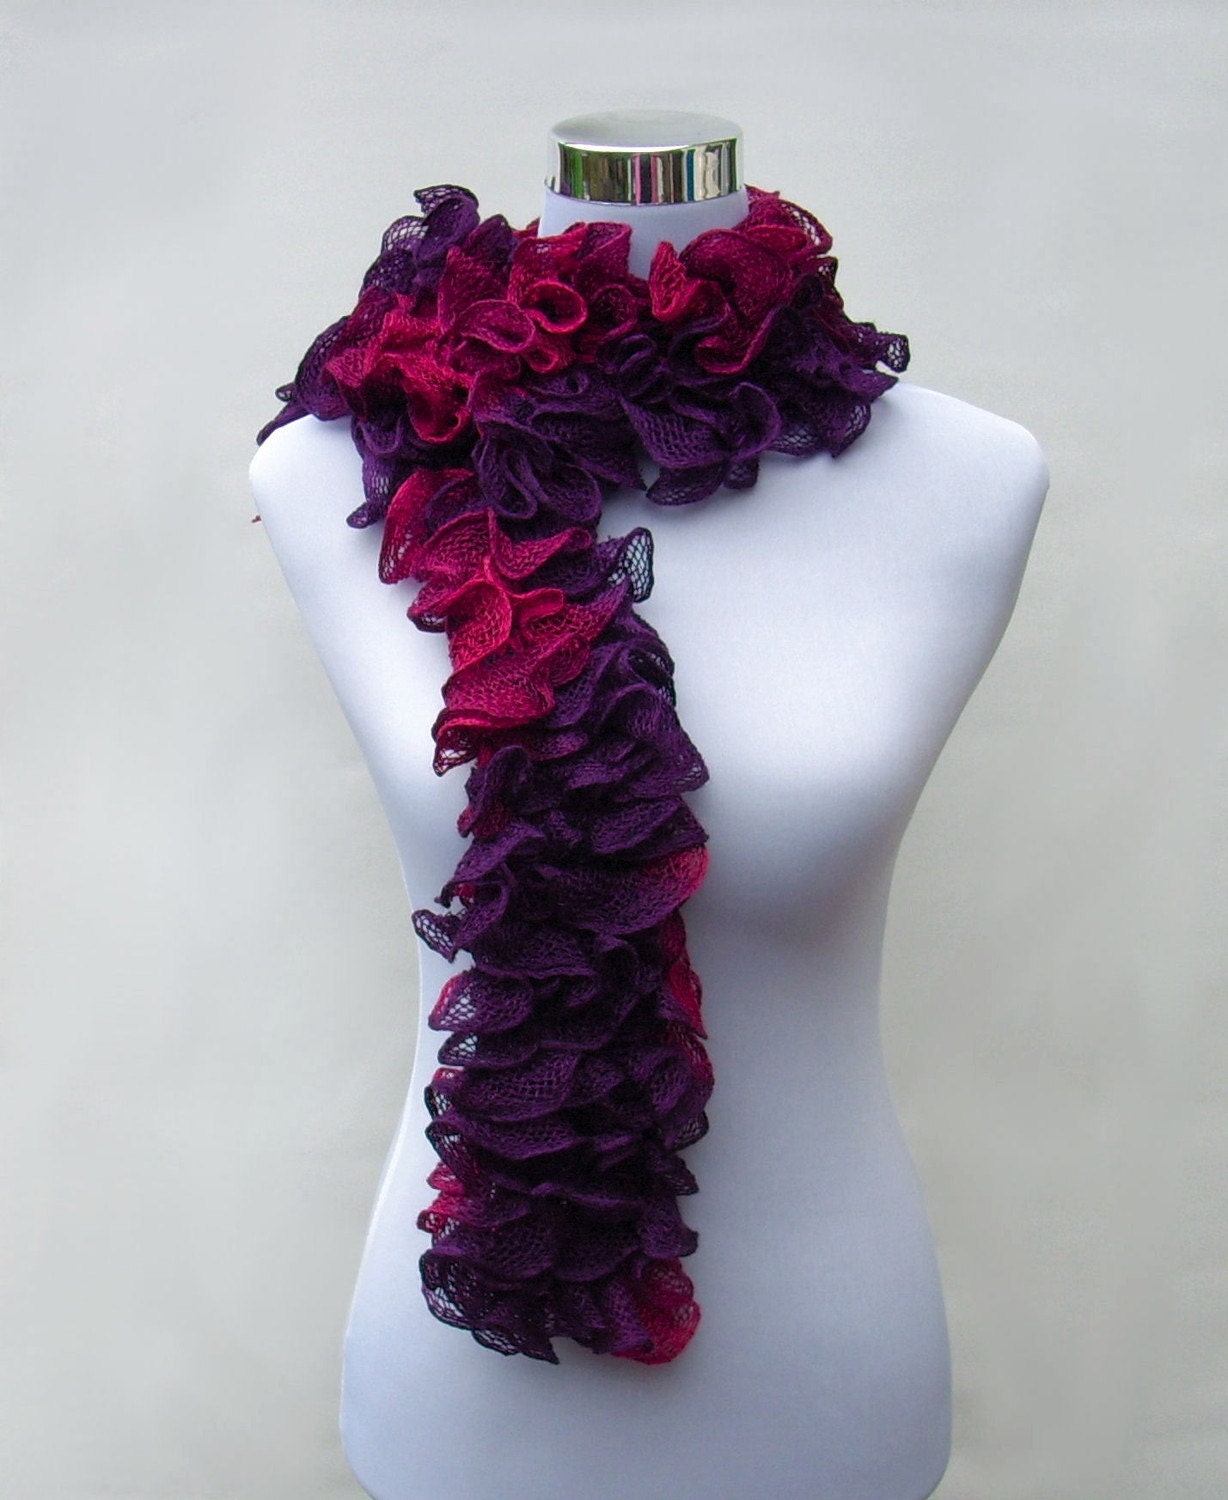 Knit frilly scarf ruffle flamenco cancan burlesque scarf in rich purple and burgundy berry reds